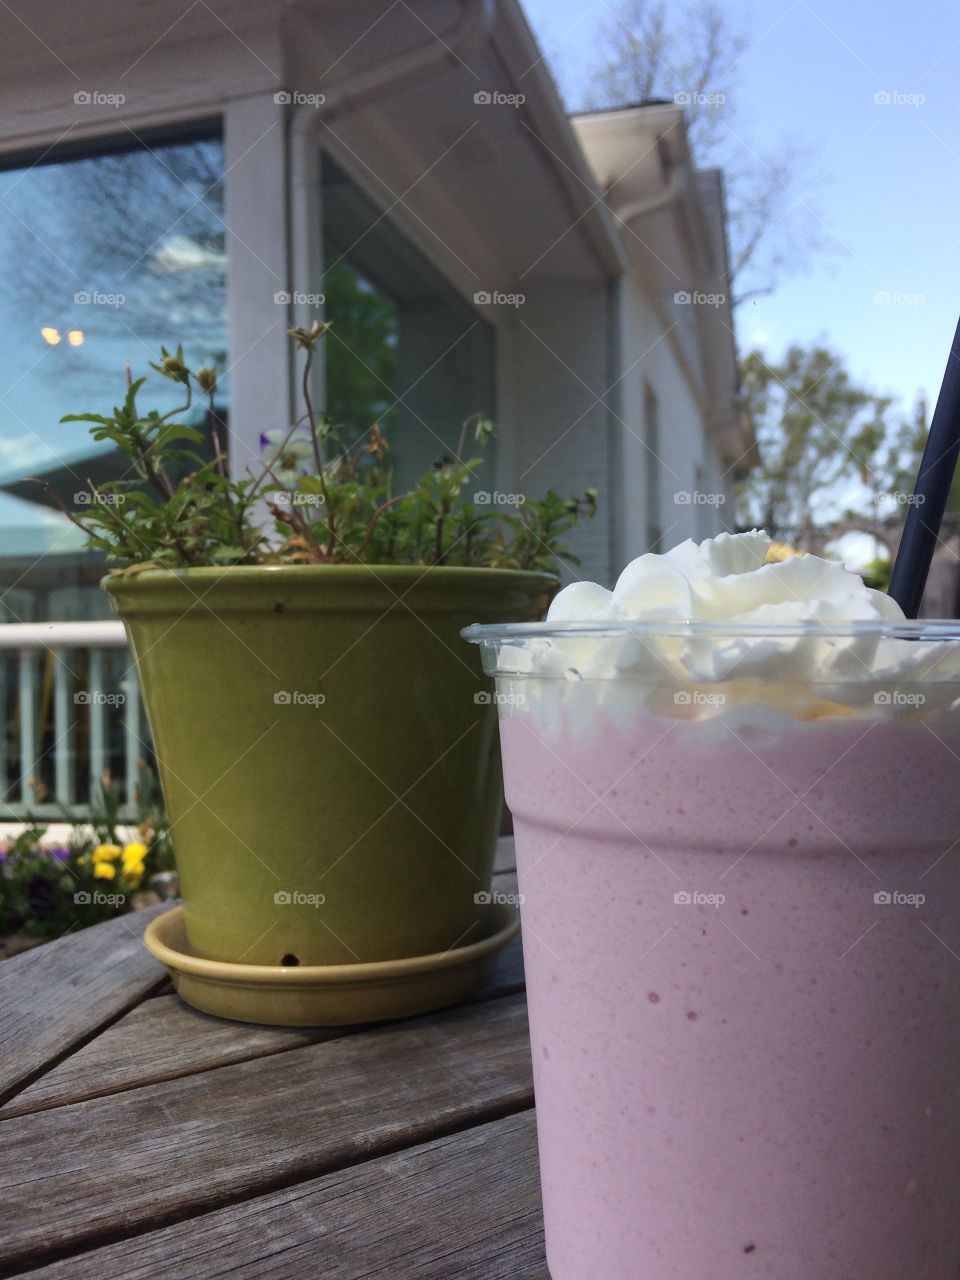 This is the strawberry milkshake from my favorite coffee shop. I’m not much of a coffee drinker so I find hot chocolate and other things at coffee shops that I like. 